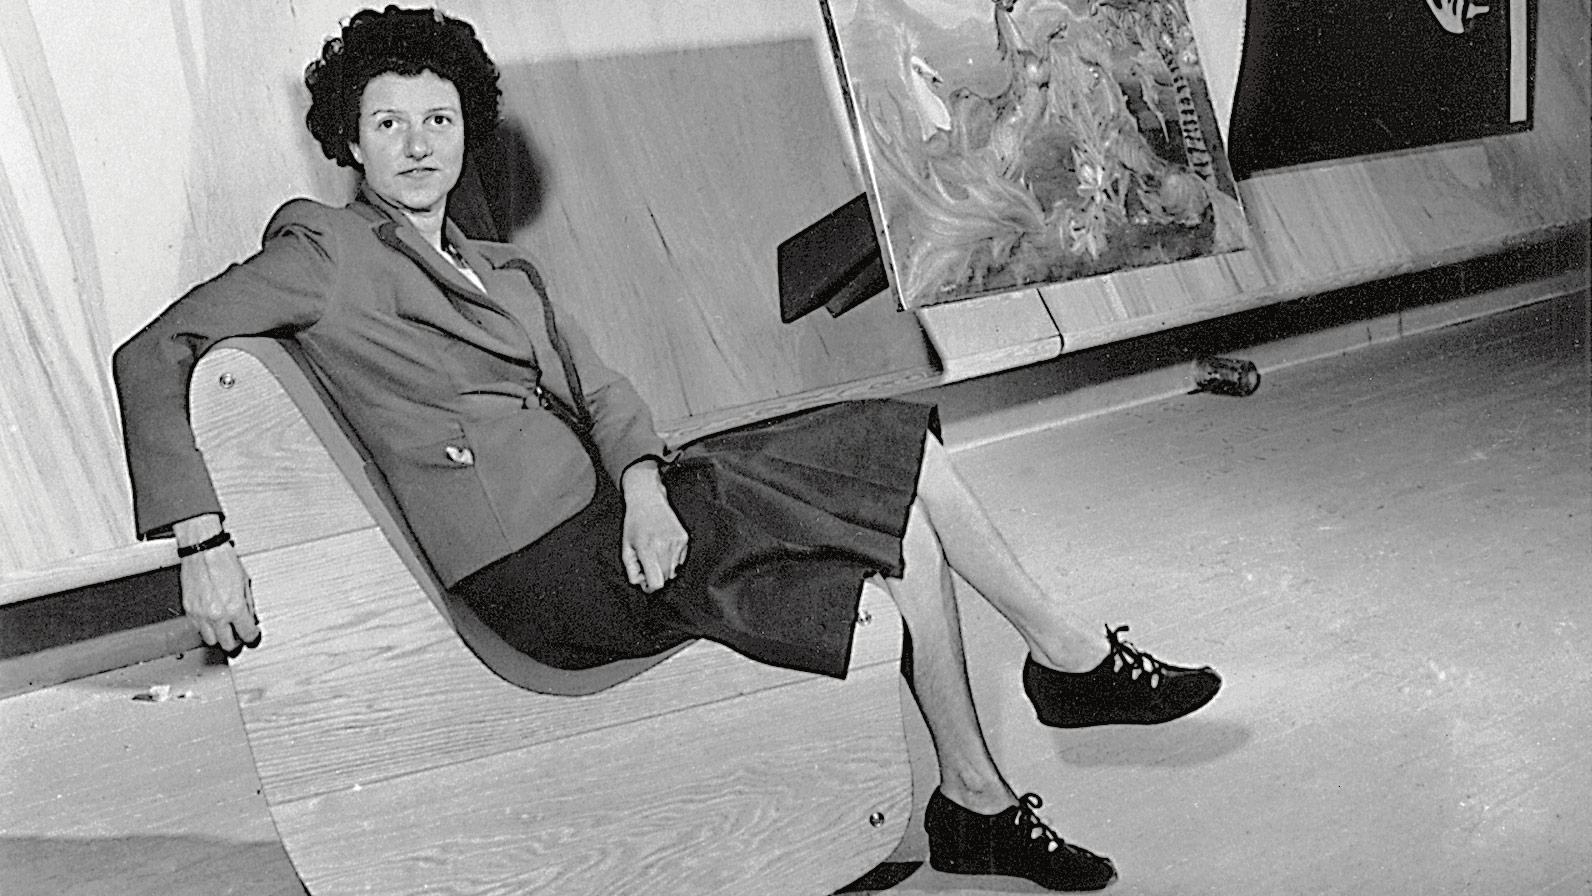 Guggenheim seated in gallery in front of abstract painting